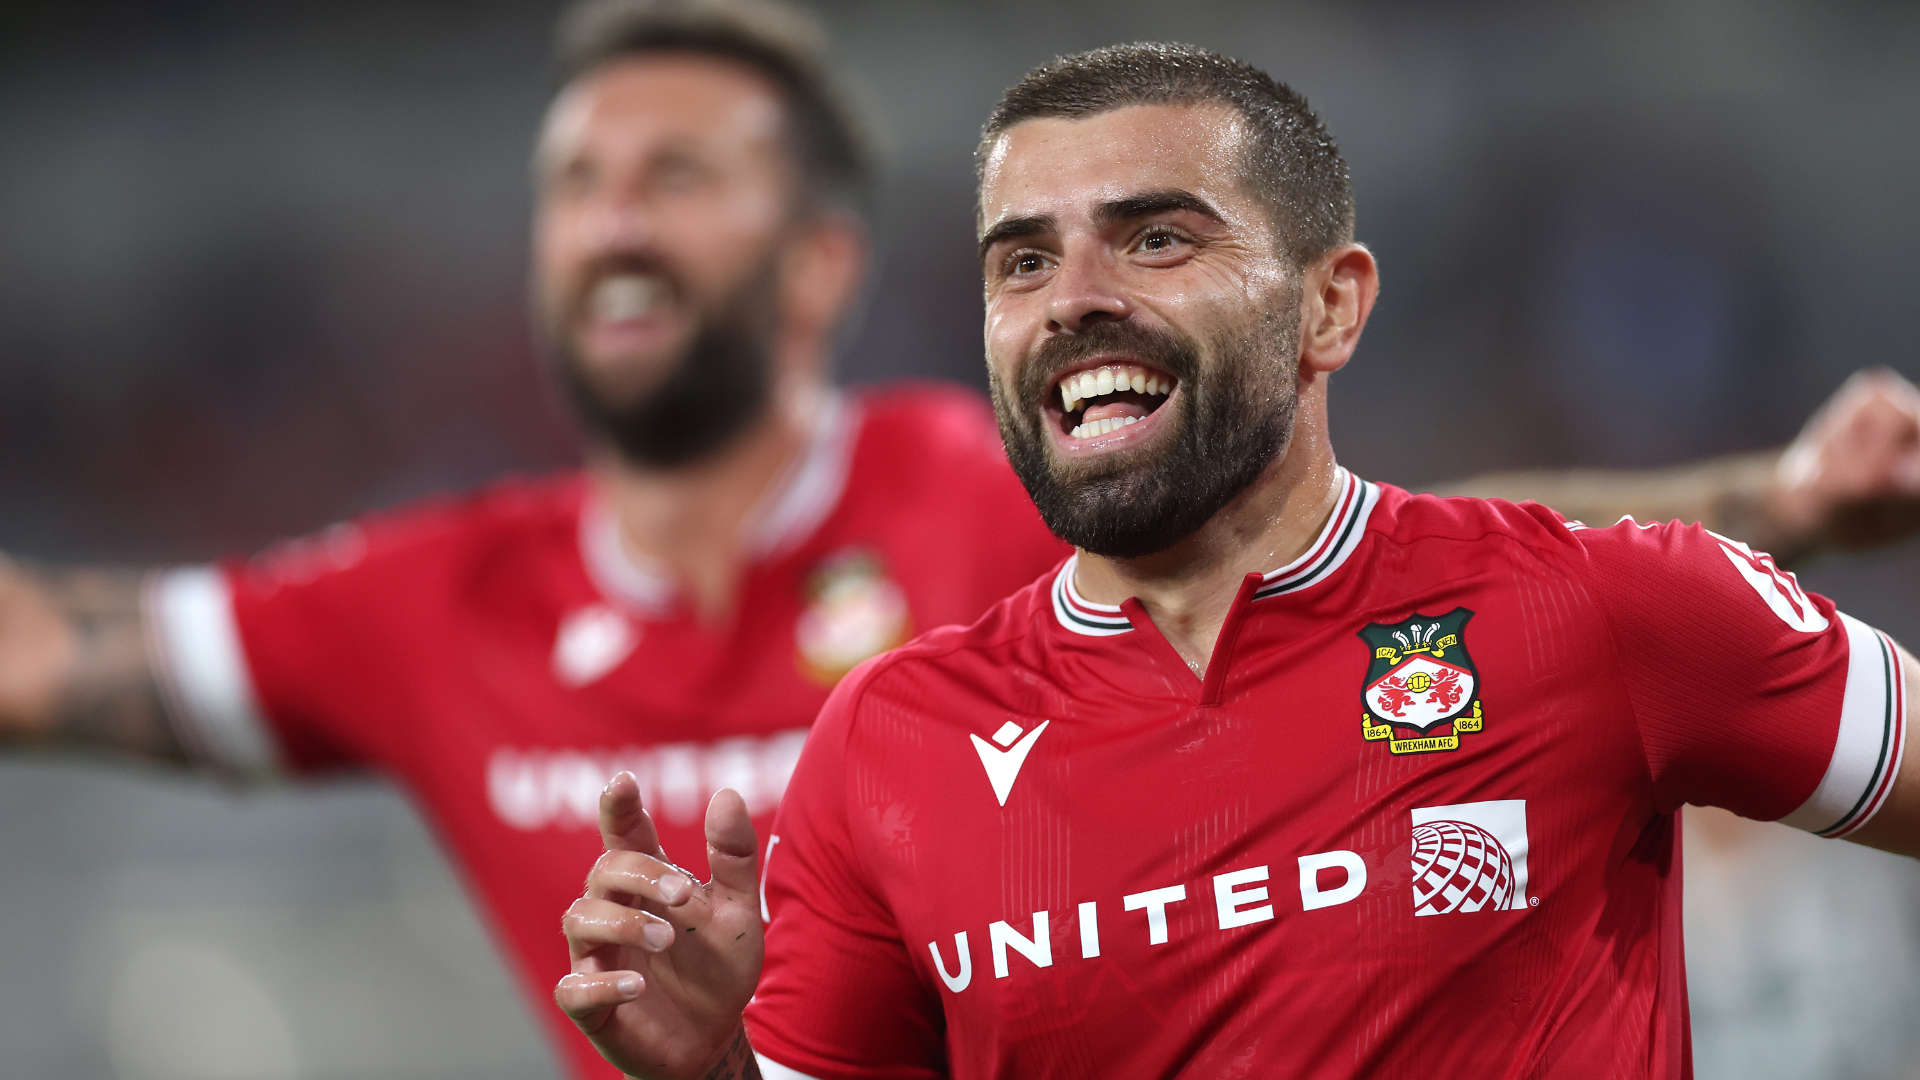 Wrexham vs Wigan Athletic Live stream, TV channel, kick-off time and where to watch Goal US